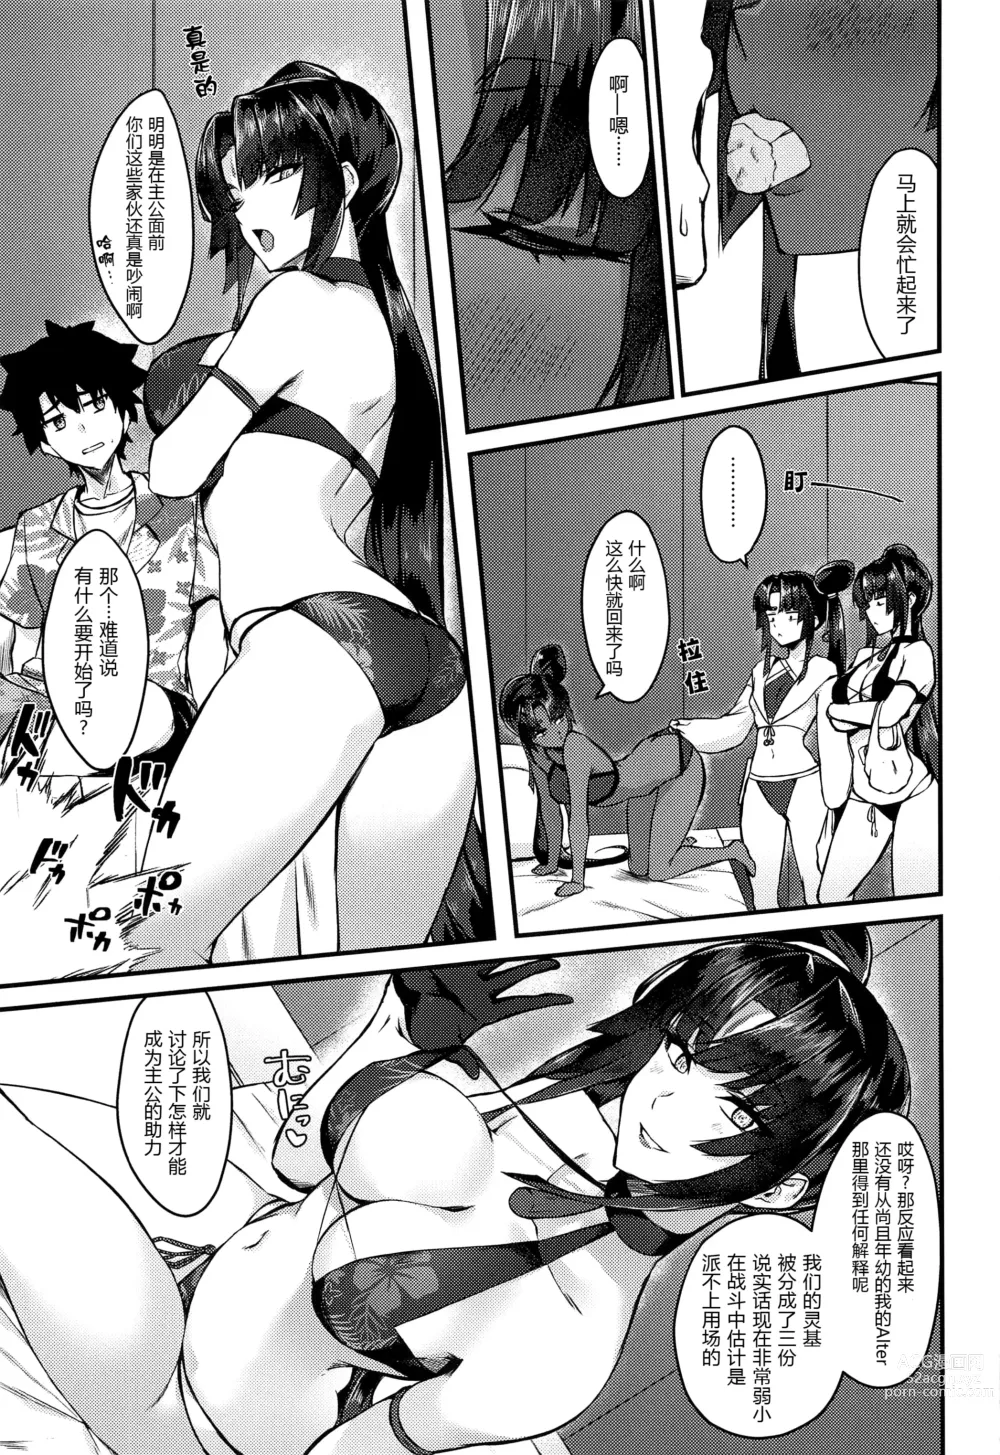 Page 7 of doujinshi Comparing the Ushis